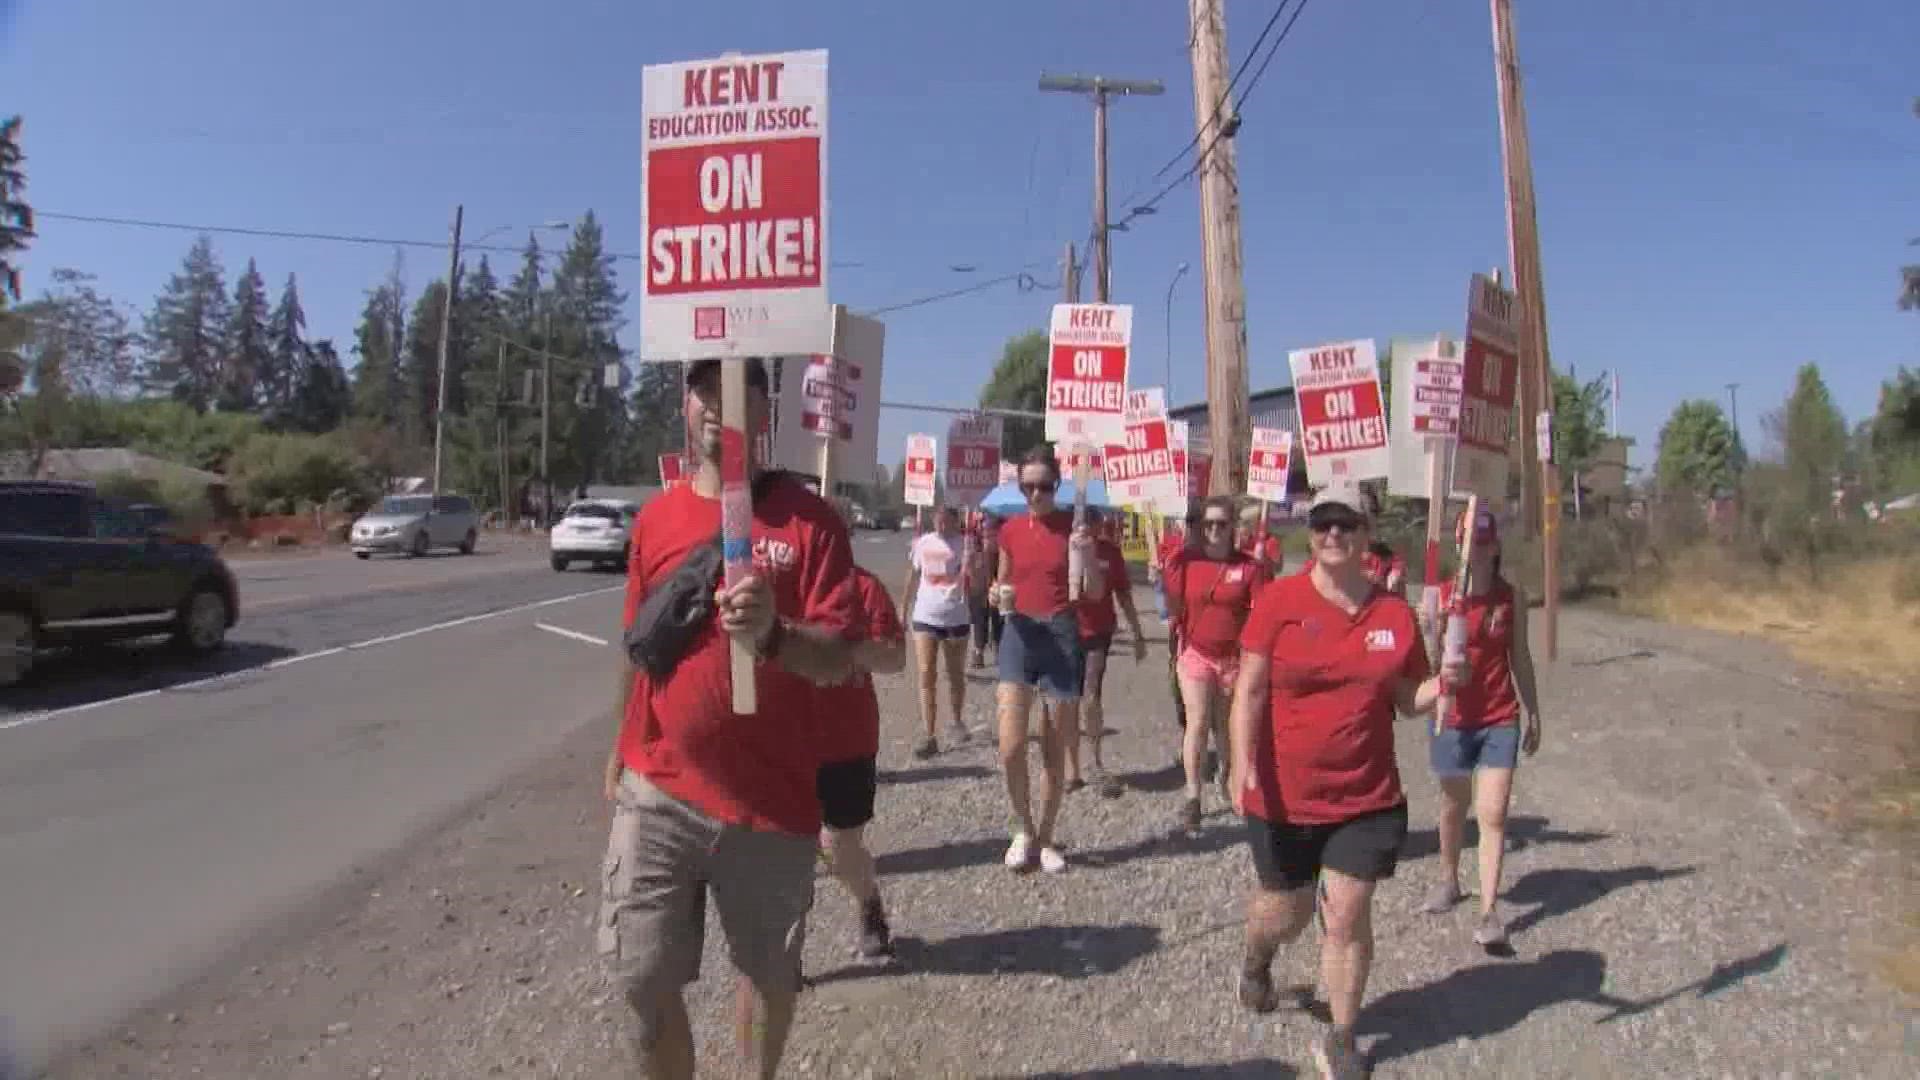 The agreement ends the teacher strike which lasted nine days.